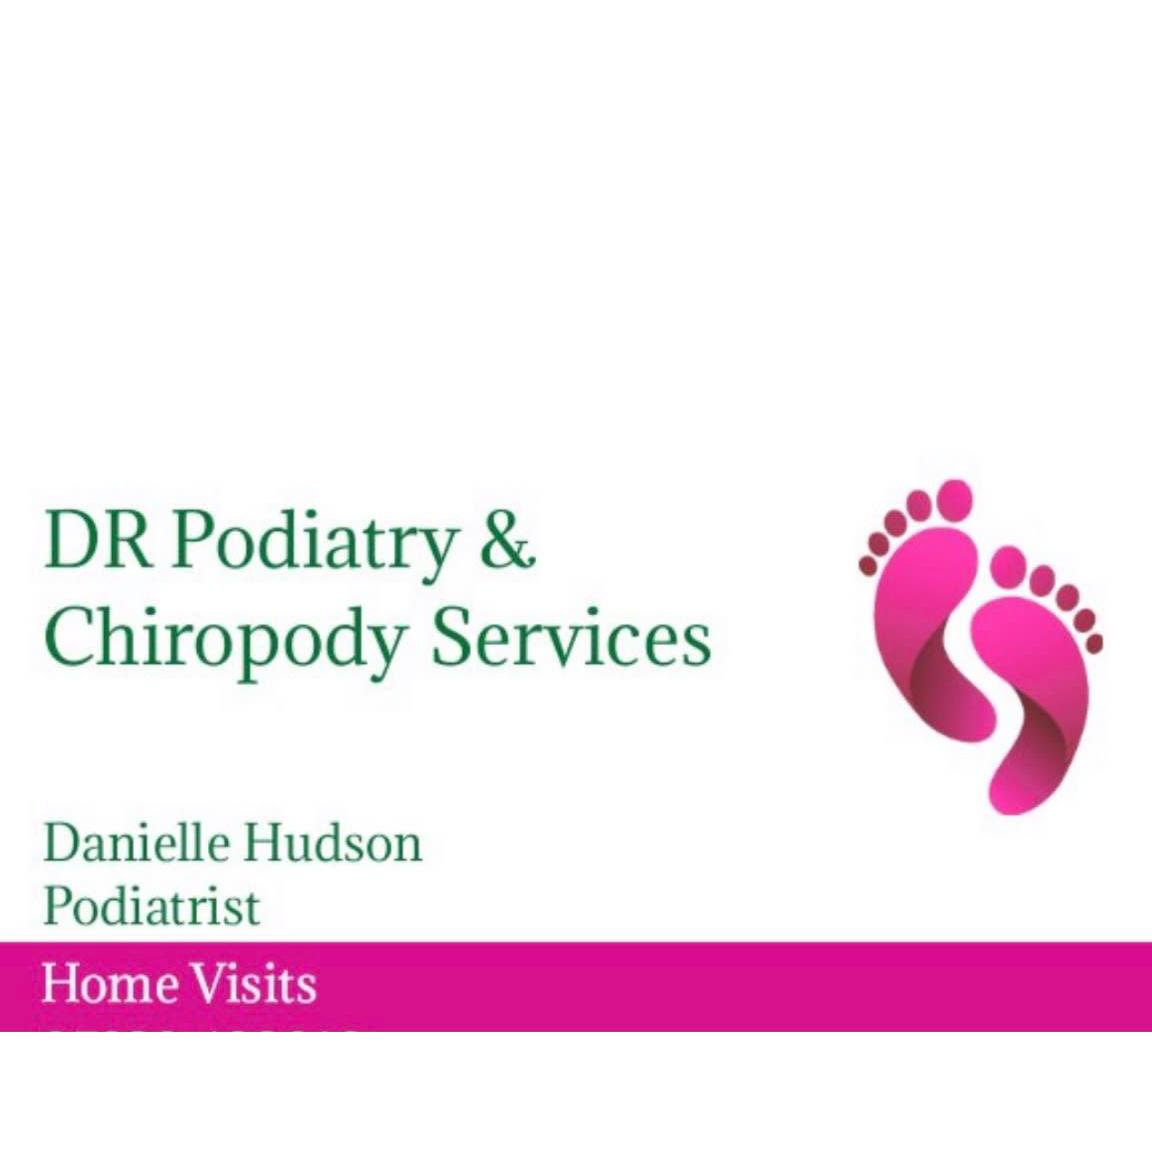 DR Podiatry & Chiropody Services - Halifax, West Yorkshire - 07939 468016 | ShowMeLocal.com